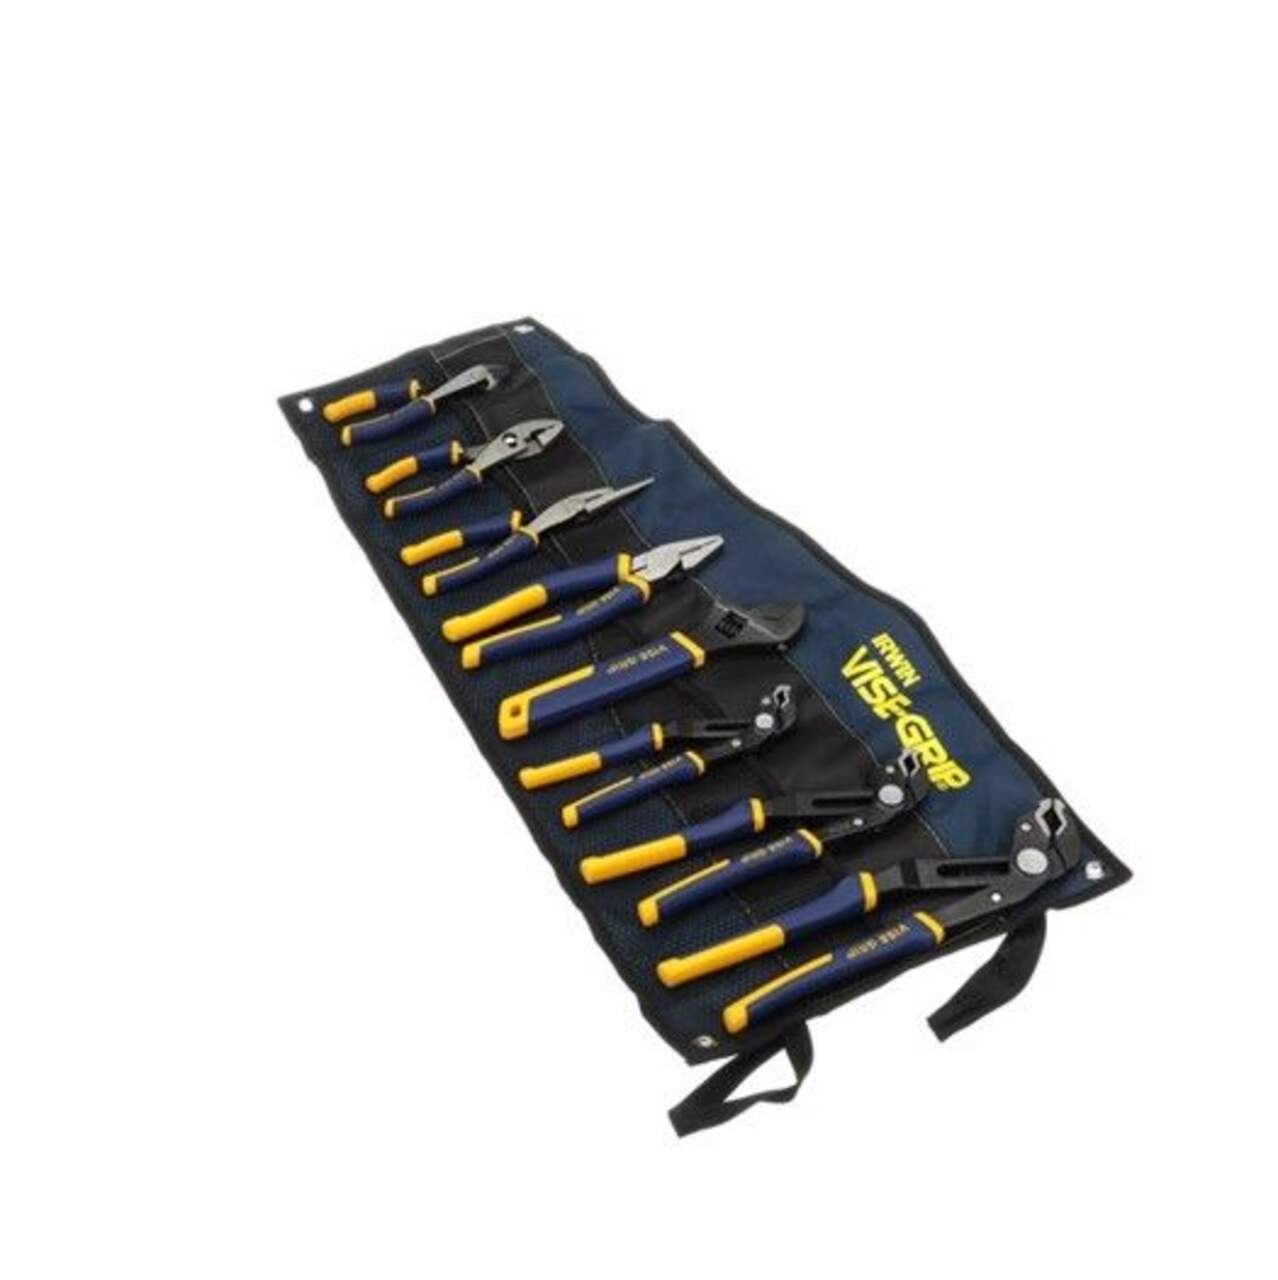 IRWIN 2078712 Vise-Grip GrooveLock Pliers Set with Storage Roll